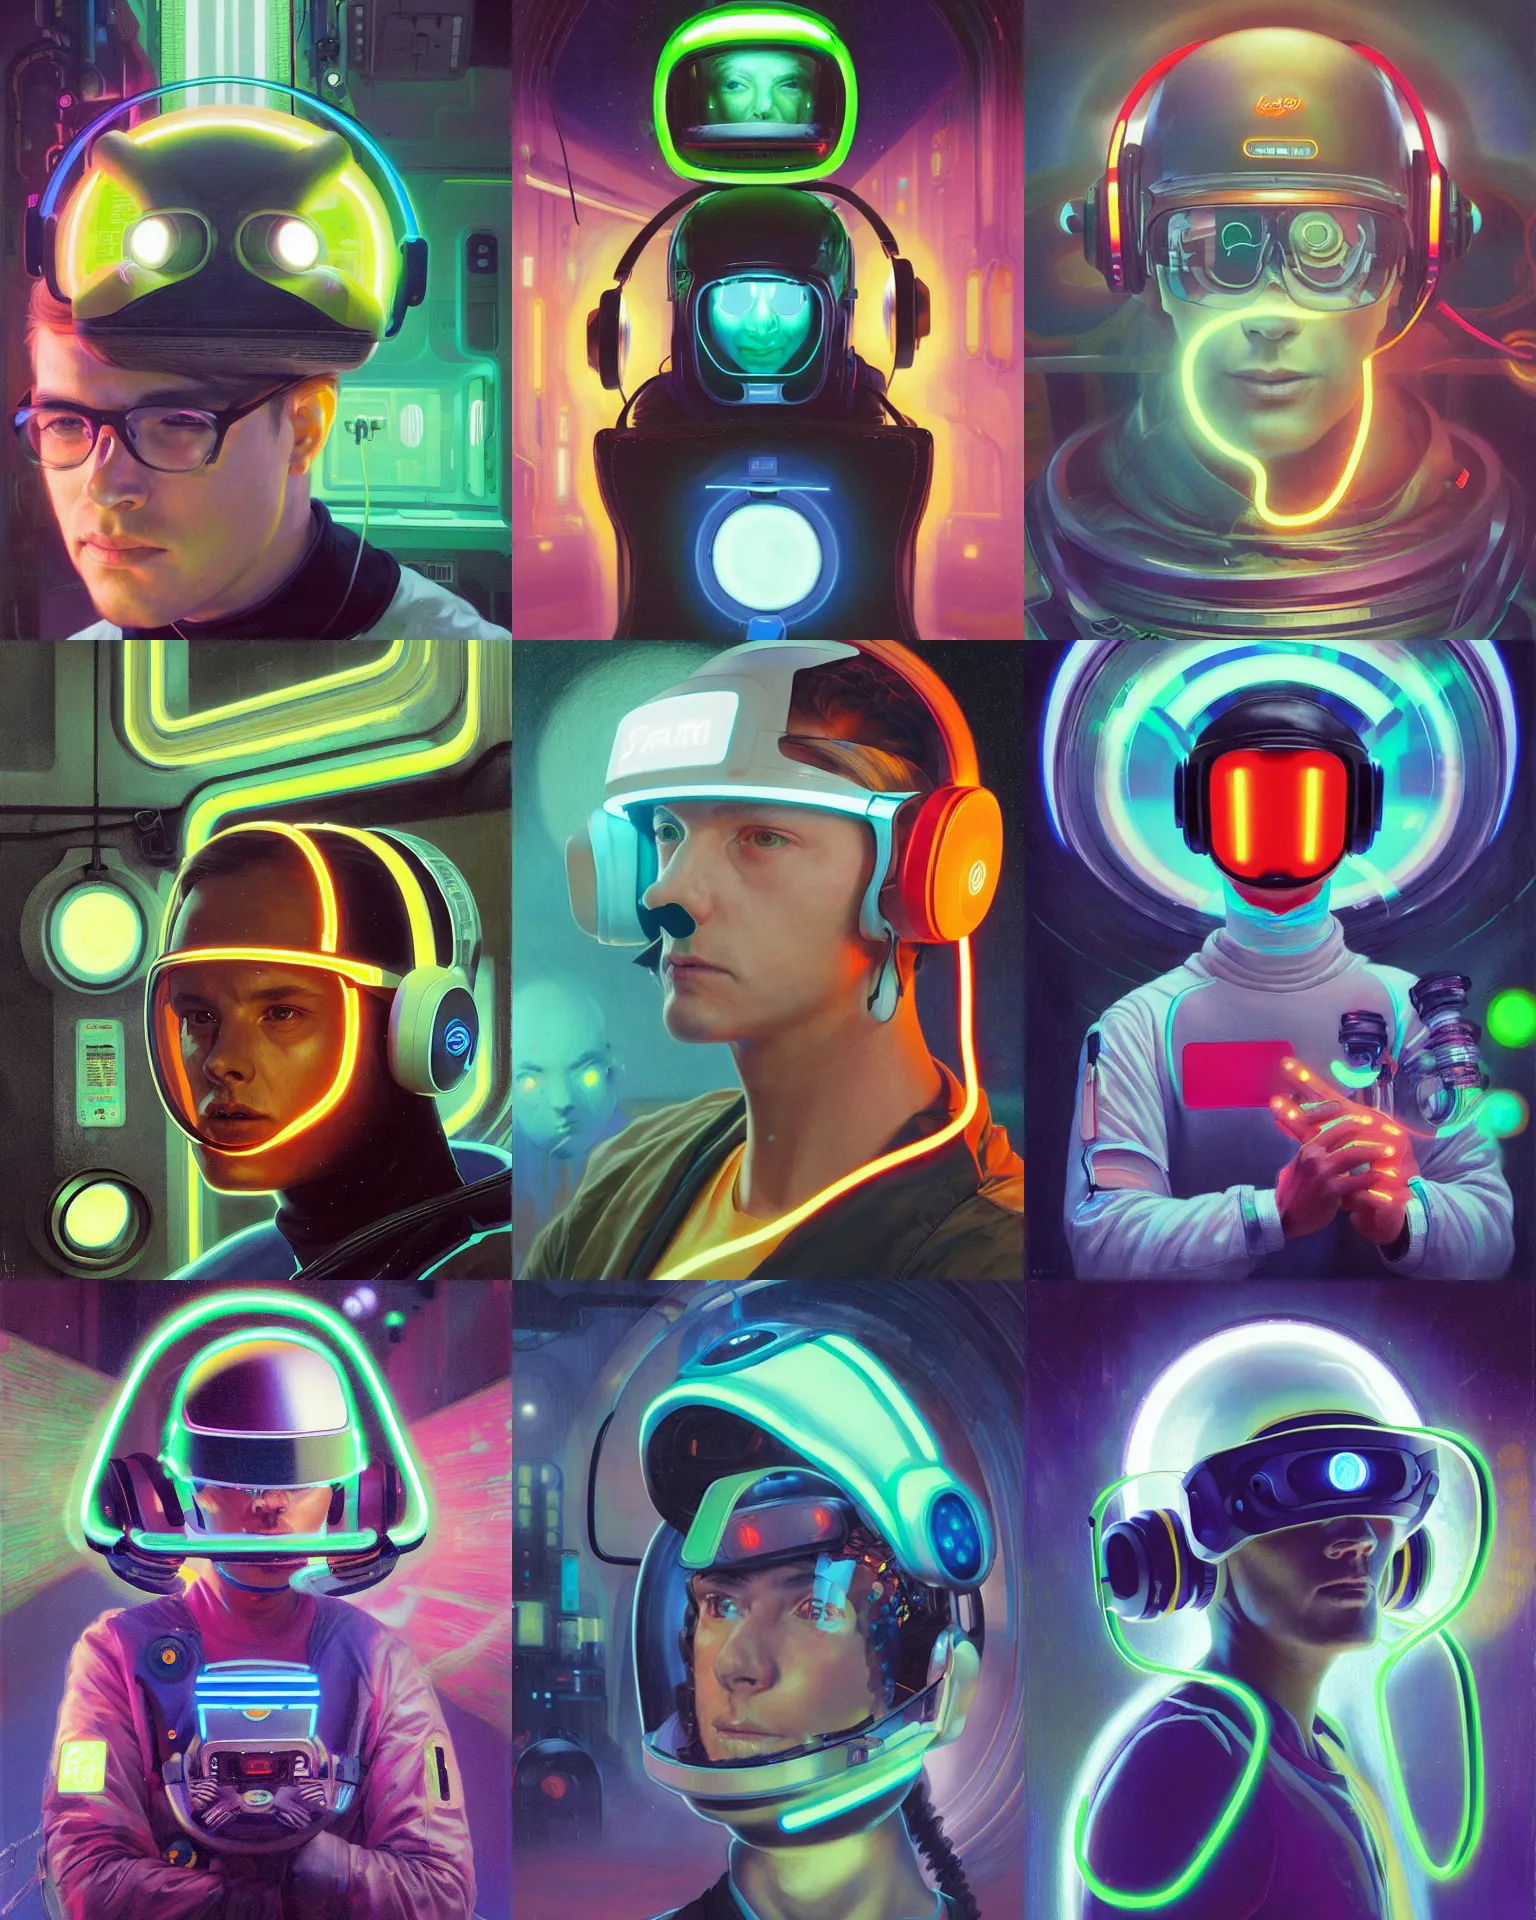 Prompt: sfam driver as a future coder looking on, glowing visor over eyes and sleek neon headphones, neon accents, bottom lighting, desaturated headshot portrait painting by donato giancola, dean cornwall, ilya repin, rhads, tom whalen, alex grey, alphonse mucha, astronaut cyberpunk electric fashion photography